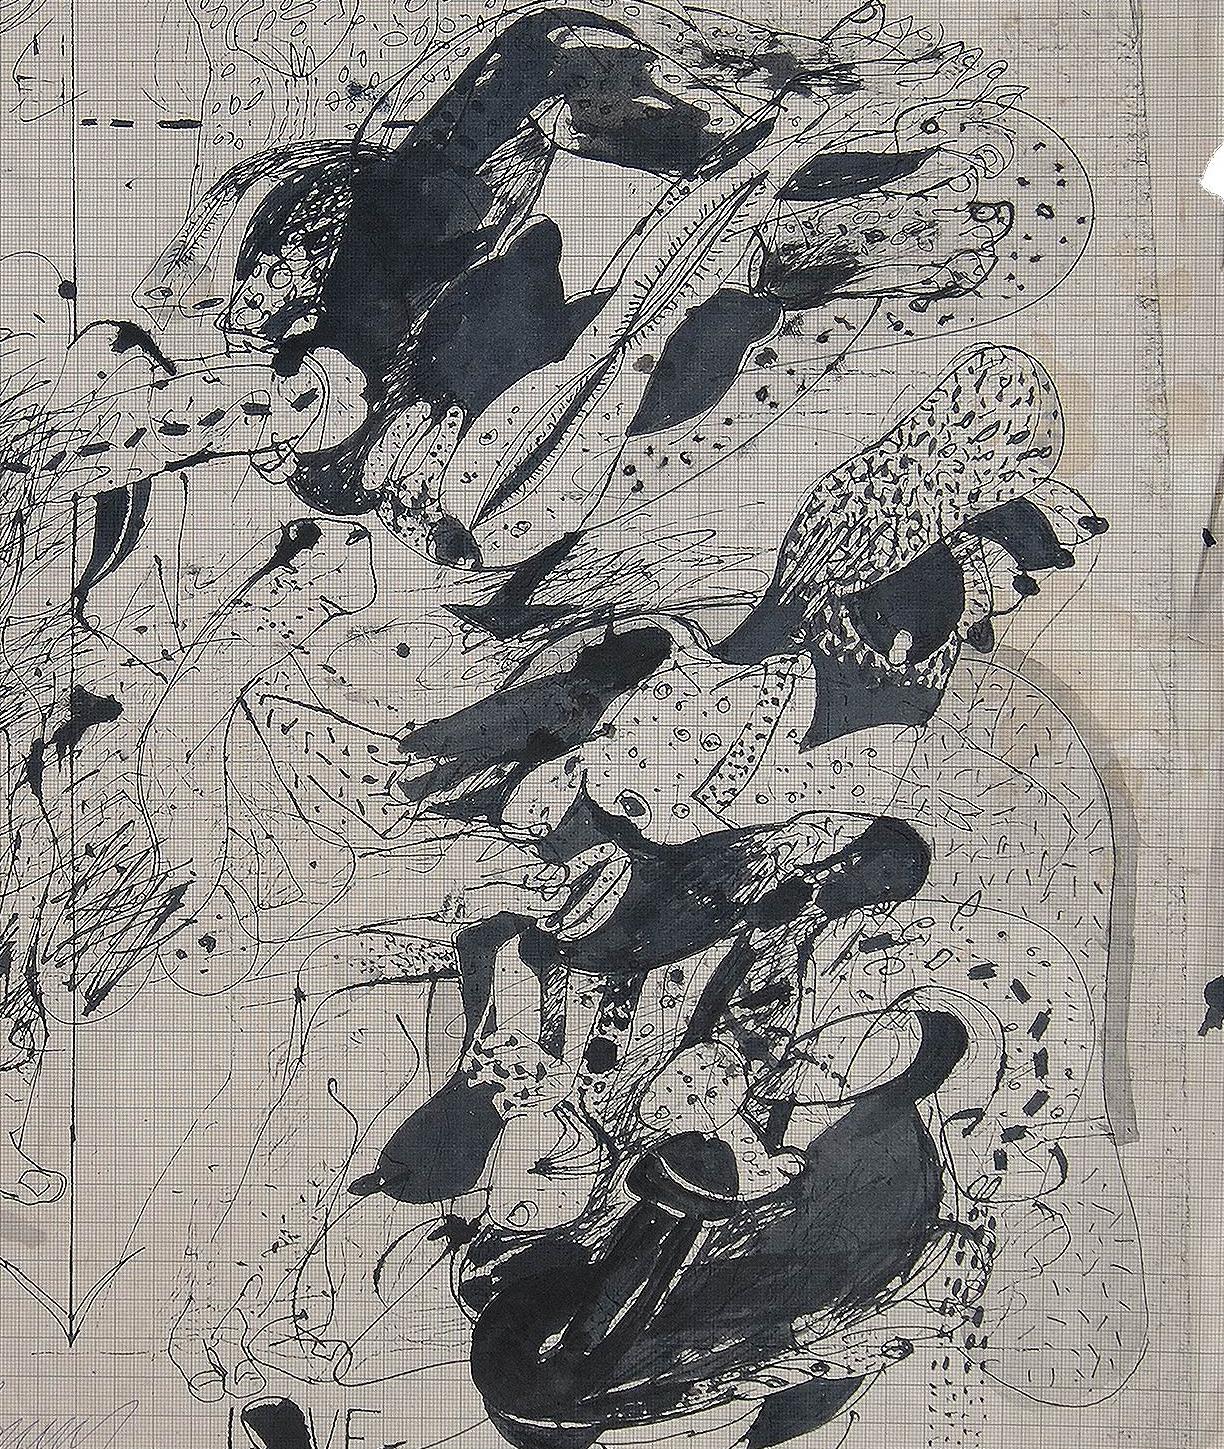 Jottings, Pen & Ink on Graph Paper, Black & White by Indian Artist 